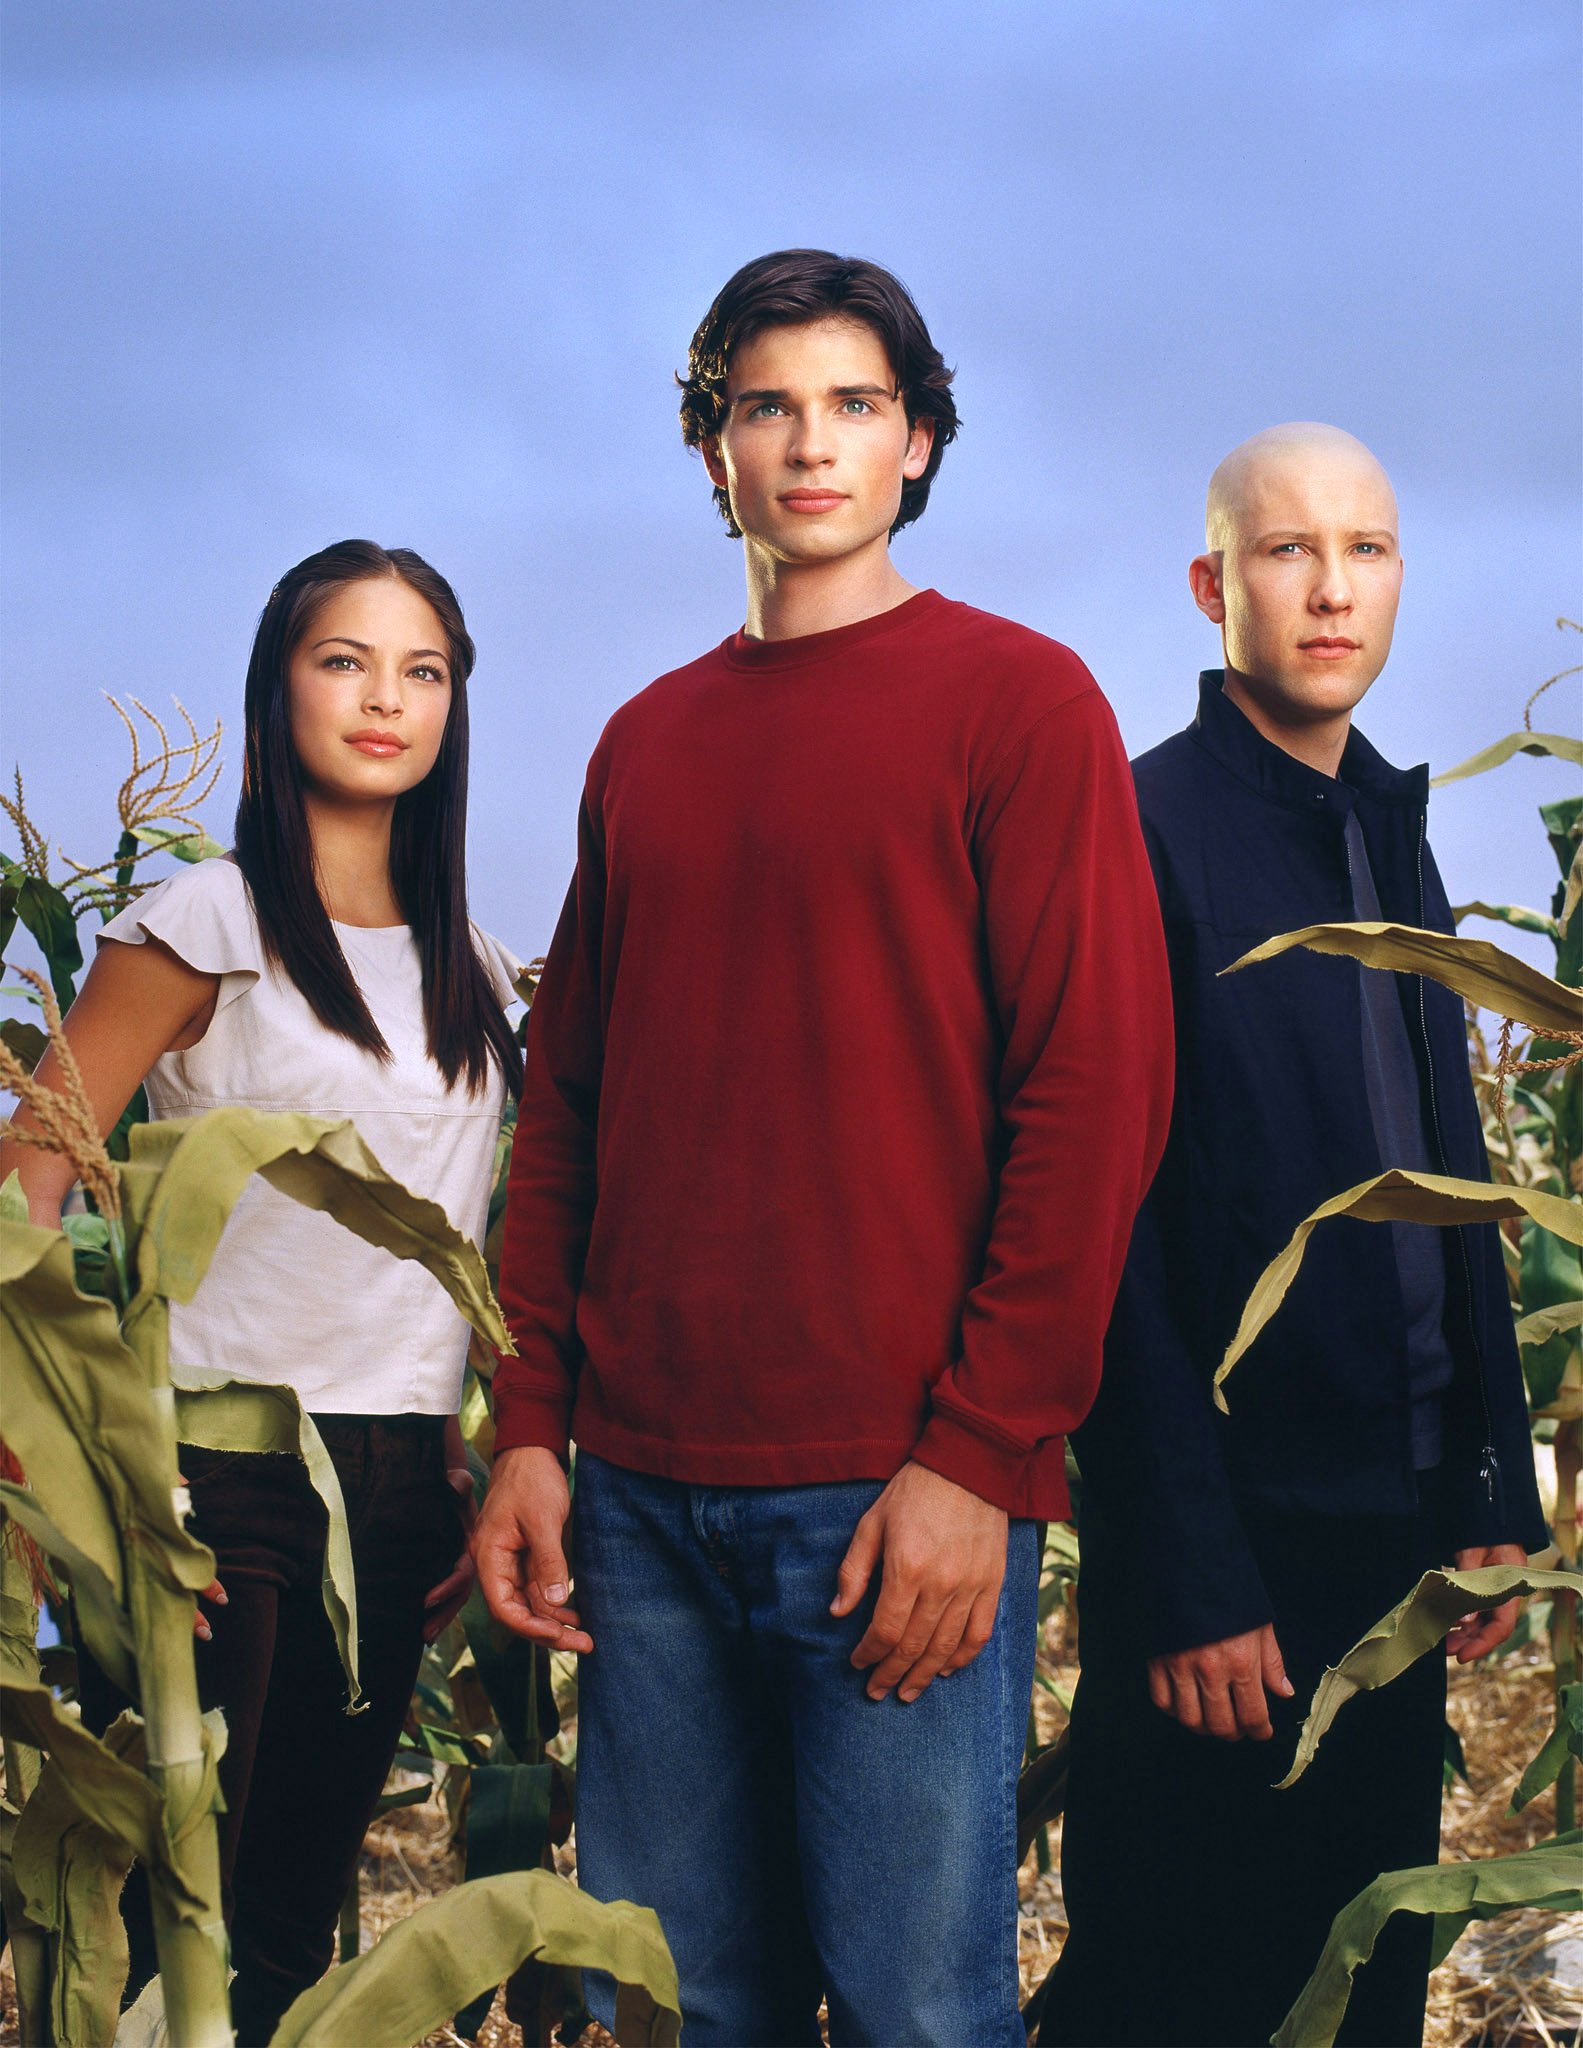 Smallville was on our screens between 2001 and 2011